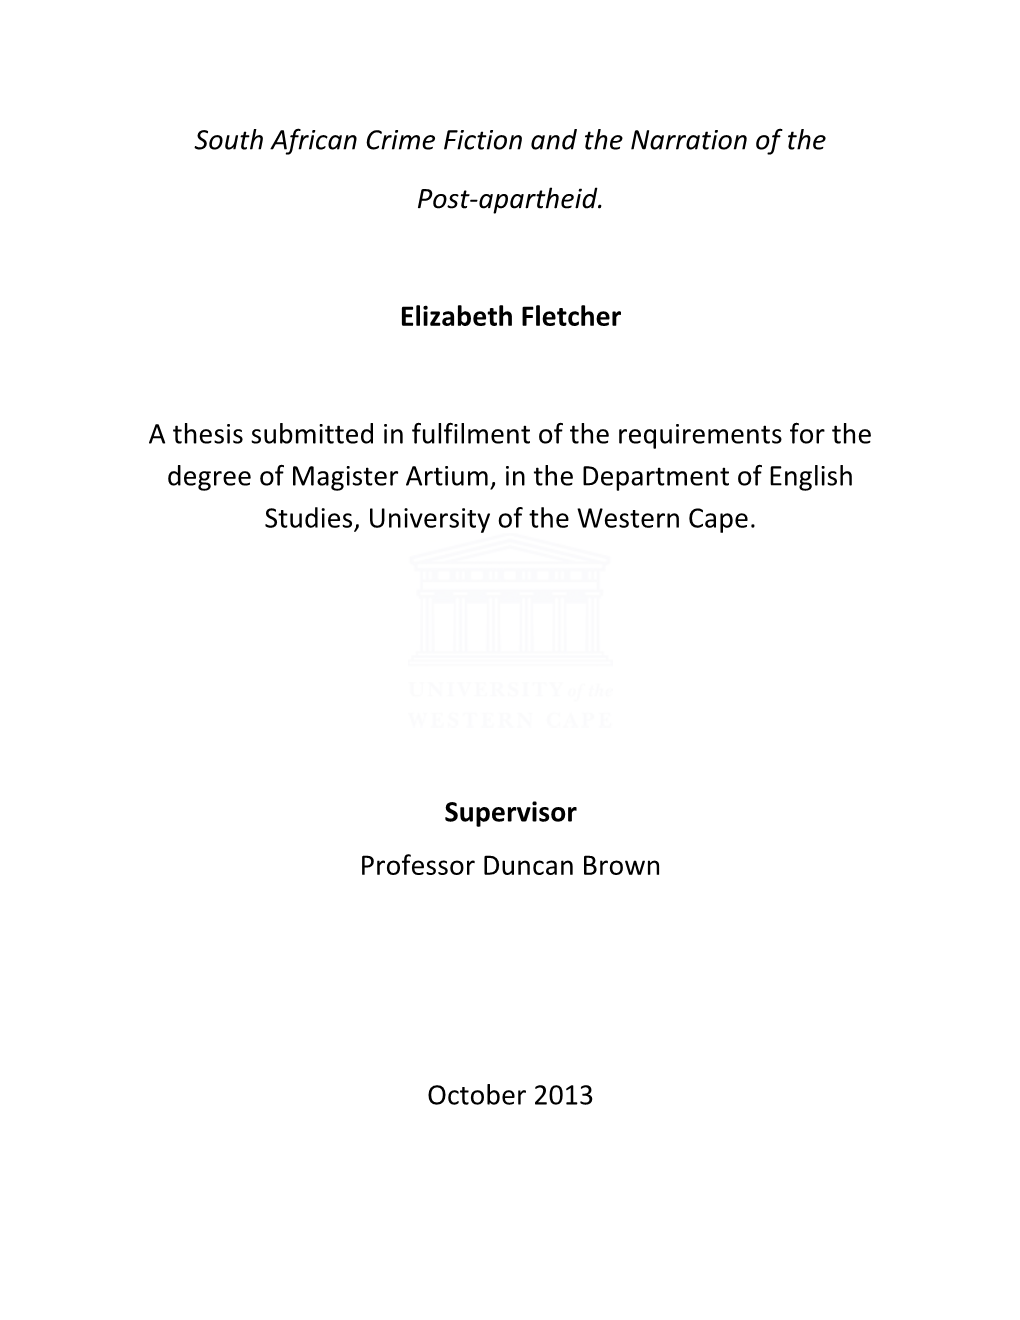 South African Crime Fiction and the Narration of the Post-Apartheid. Elizabeth Fletcher a Thesis Submitted in Fulfilment Of